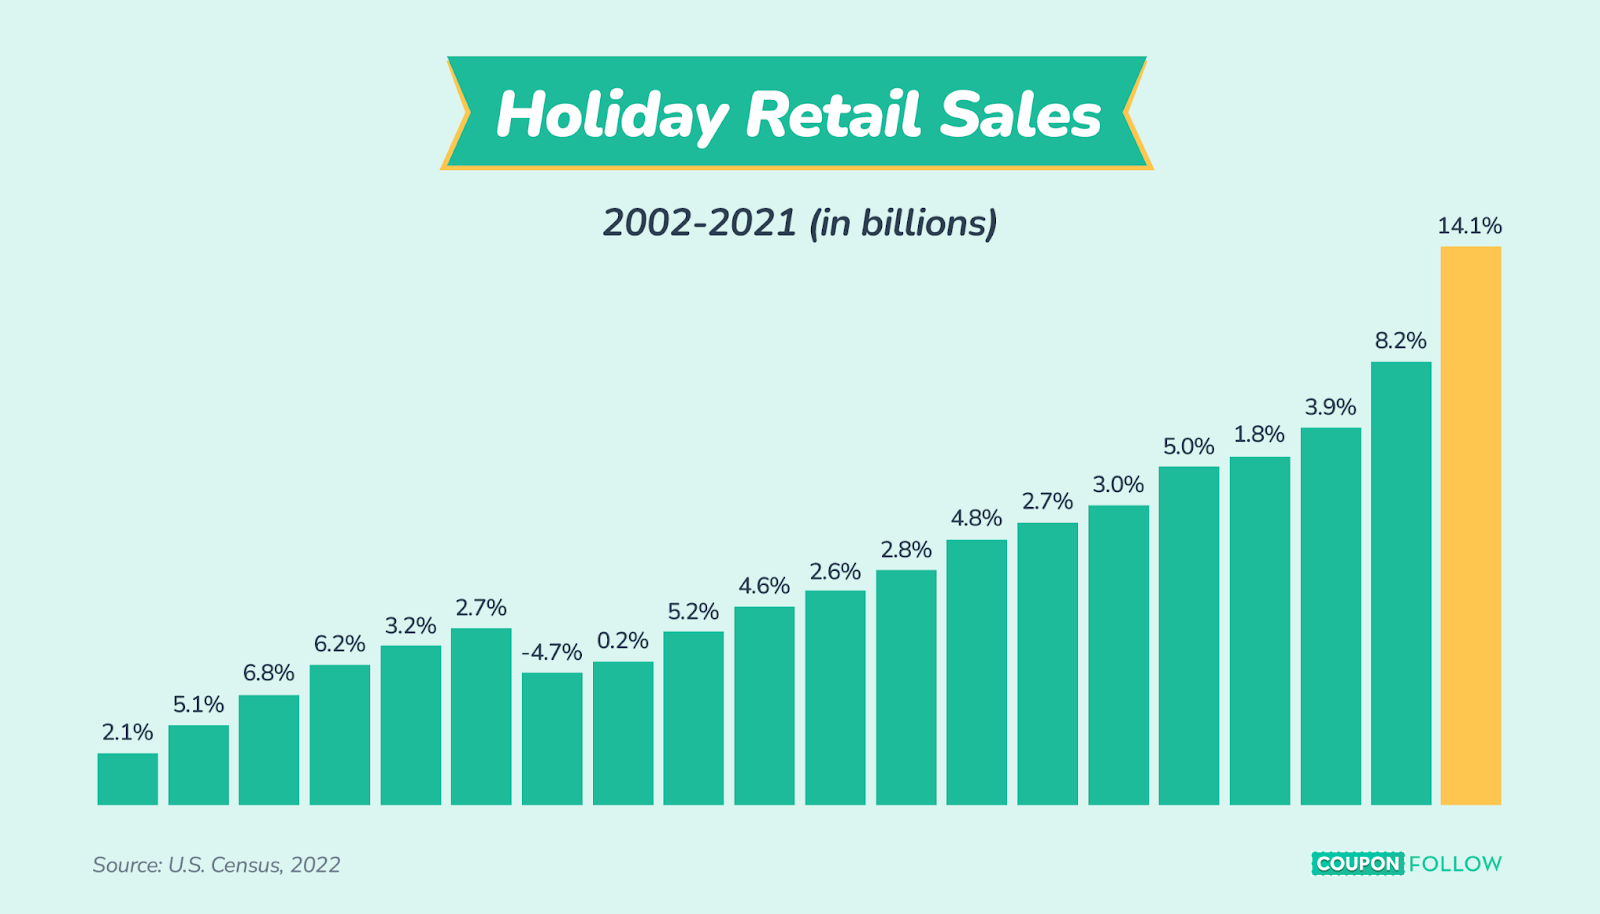 Bar chart showing historical holiday retail sale